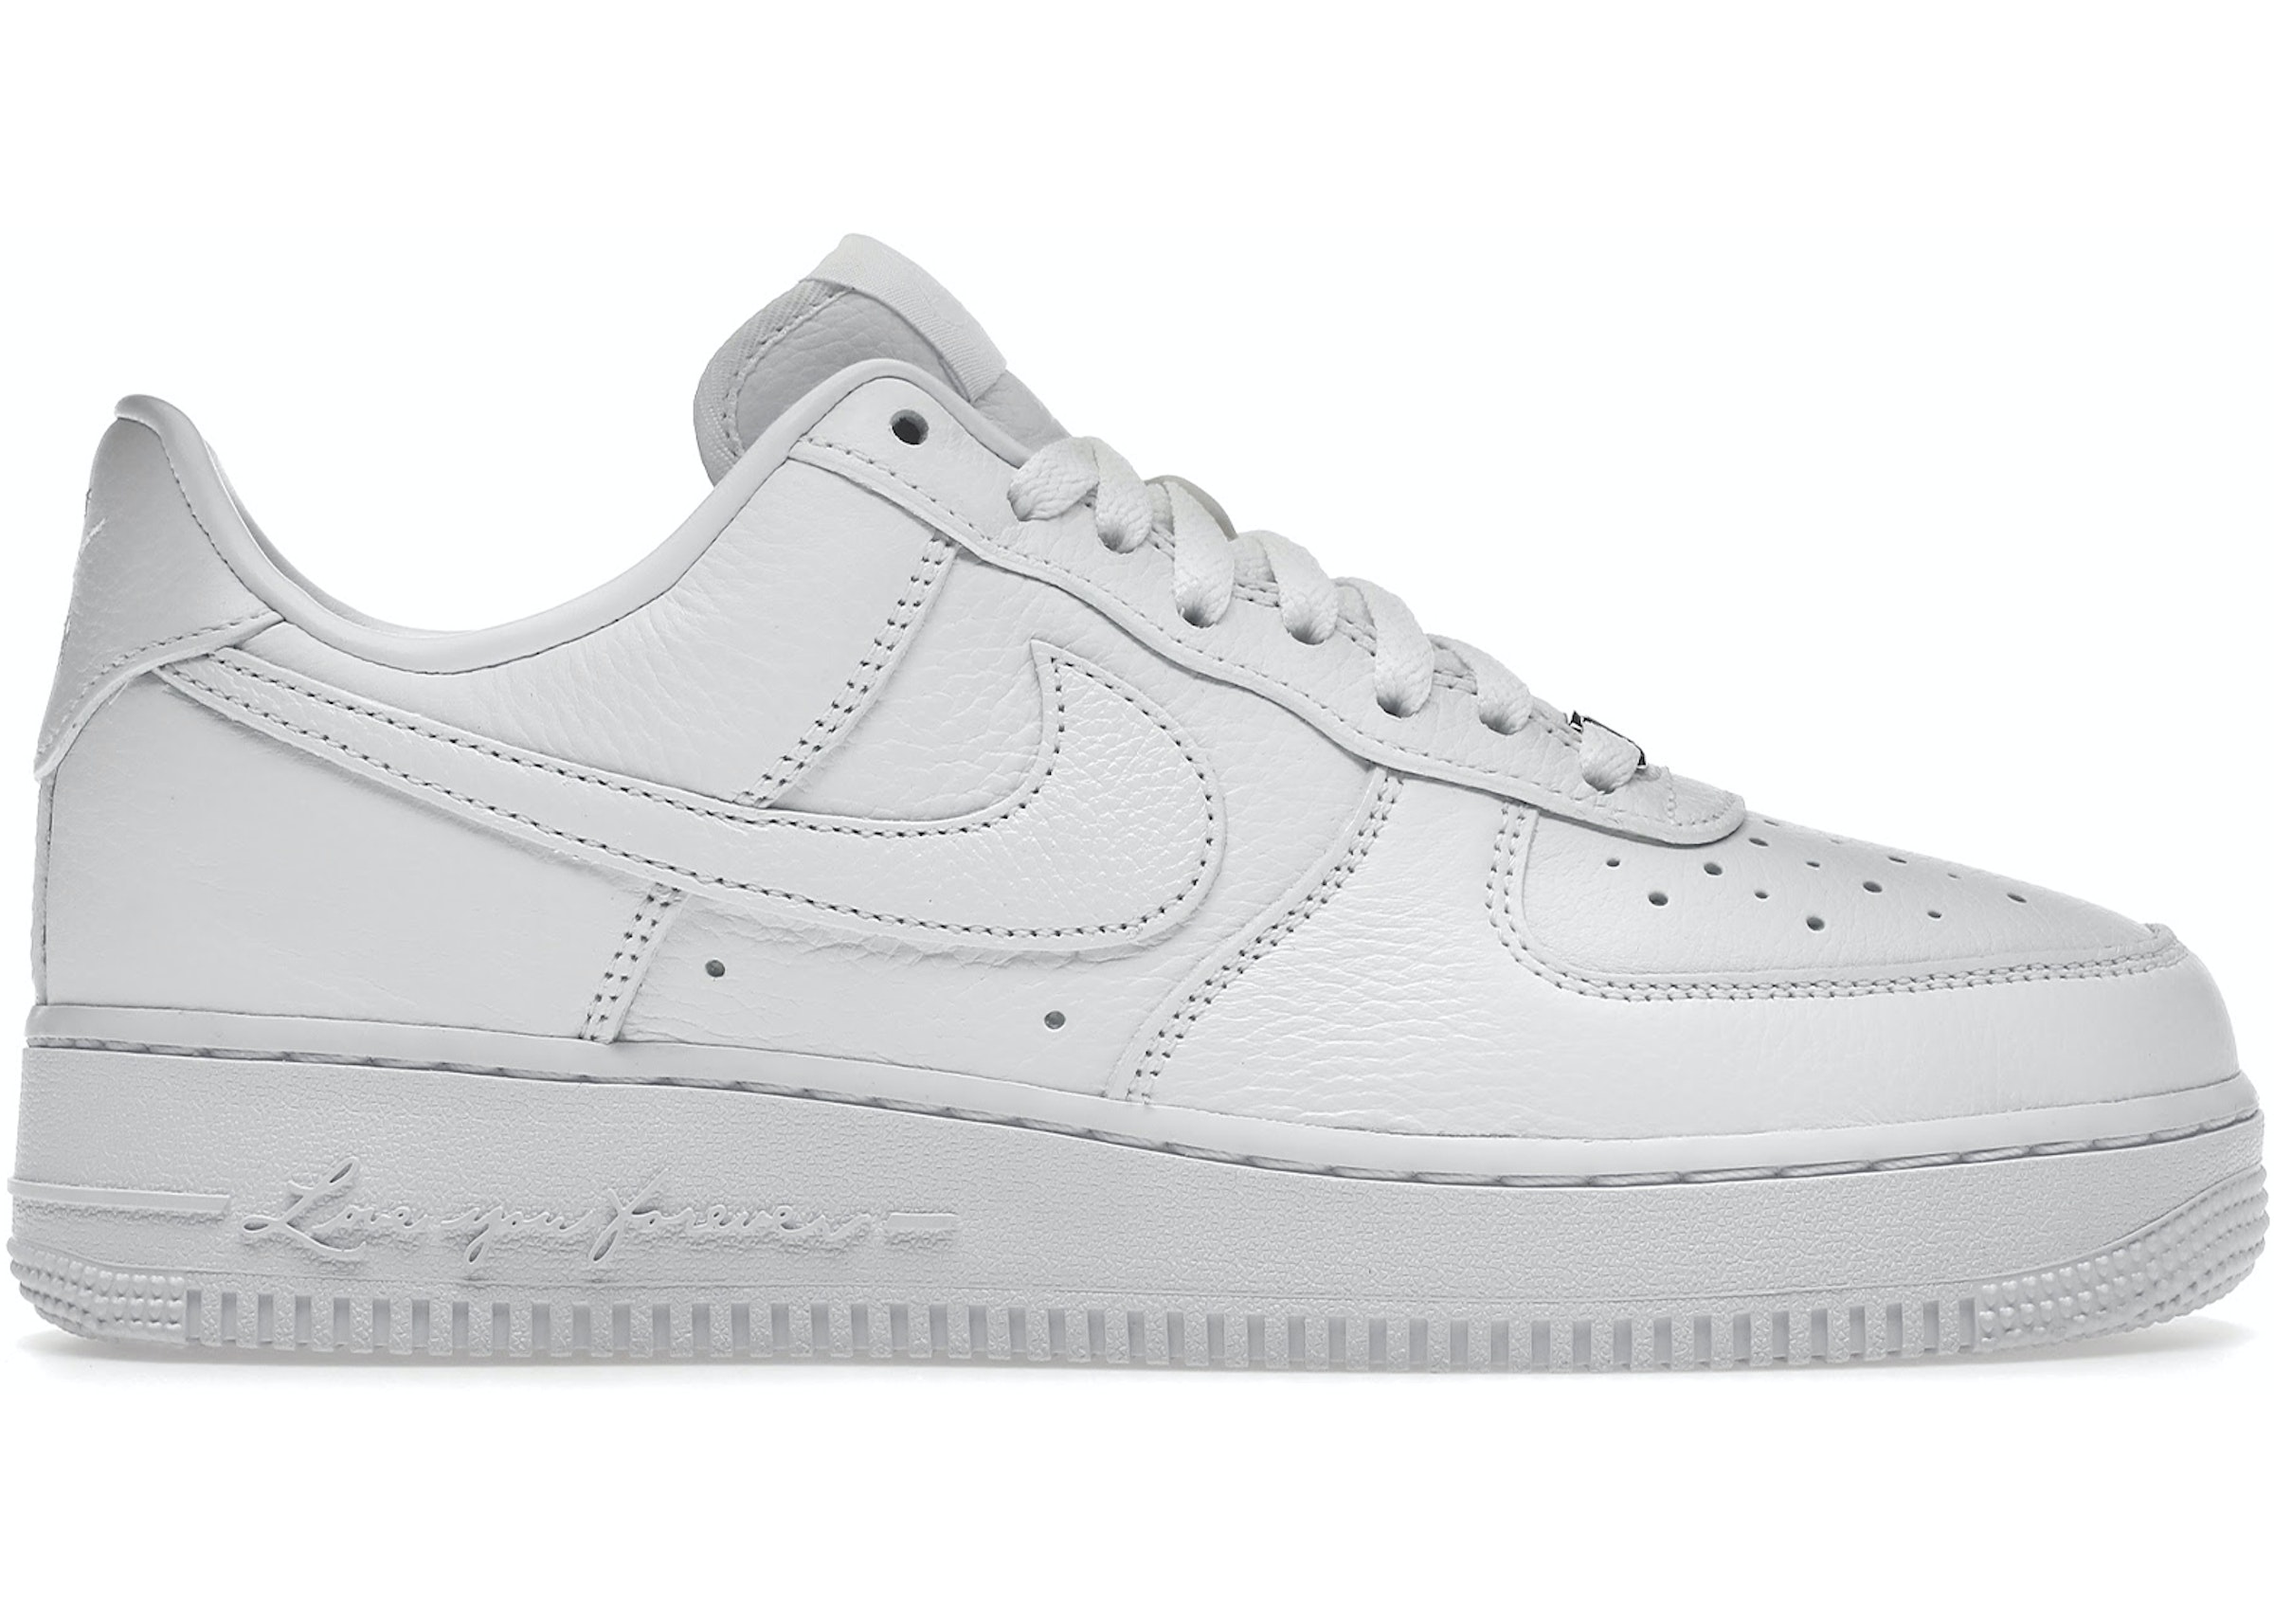 escanear Hundimiento Scully Nike Air Force 1 Low Drake NOCTA Certified Lover Boy Men's - CZ8065-100 - US